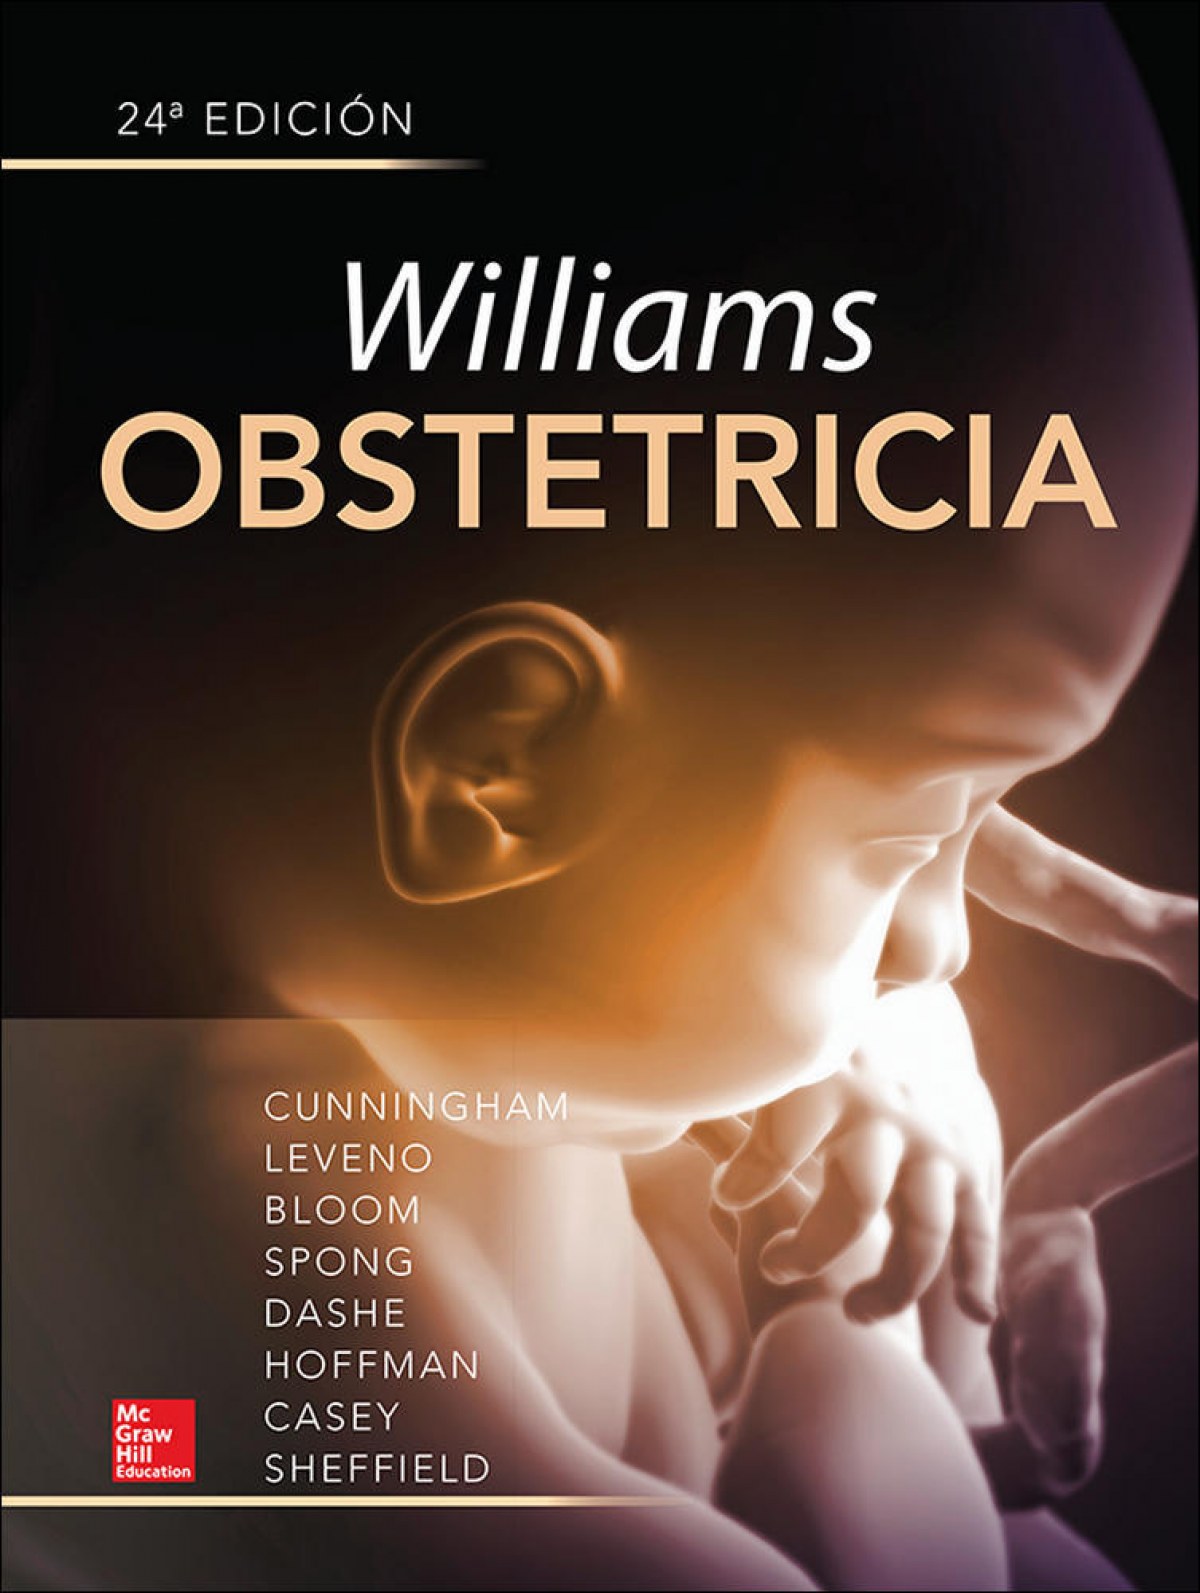 Obstrecticia. williams. (24ªed) - Cunningham